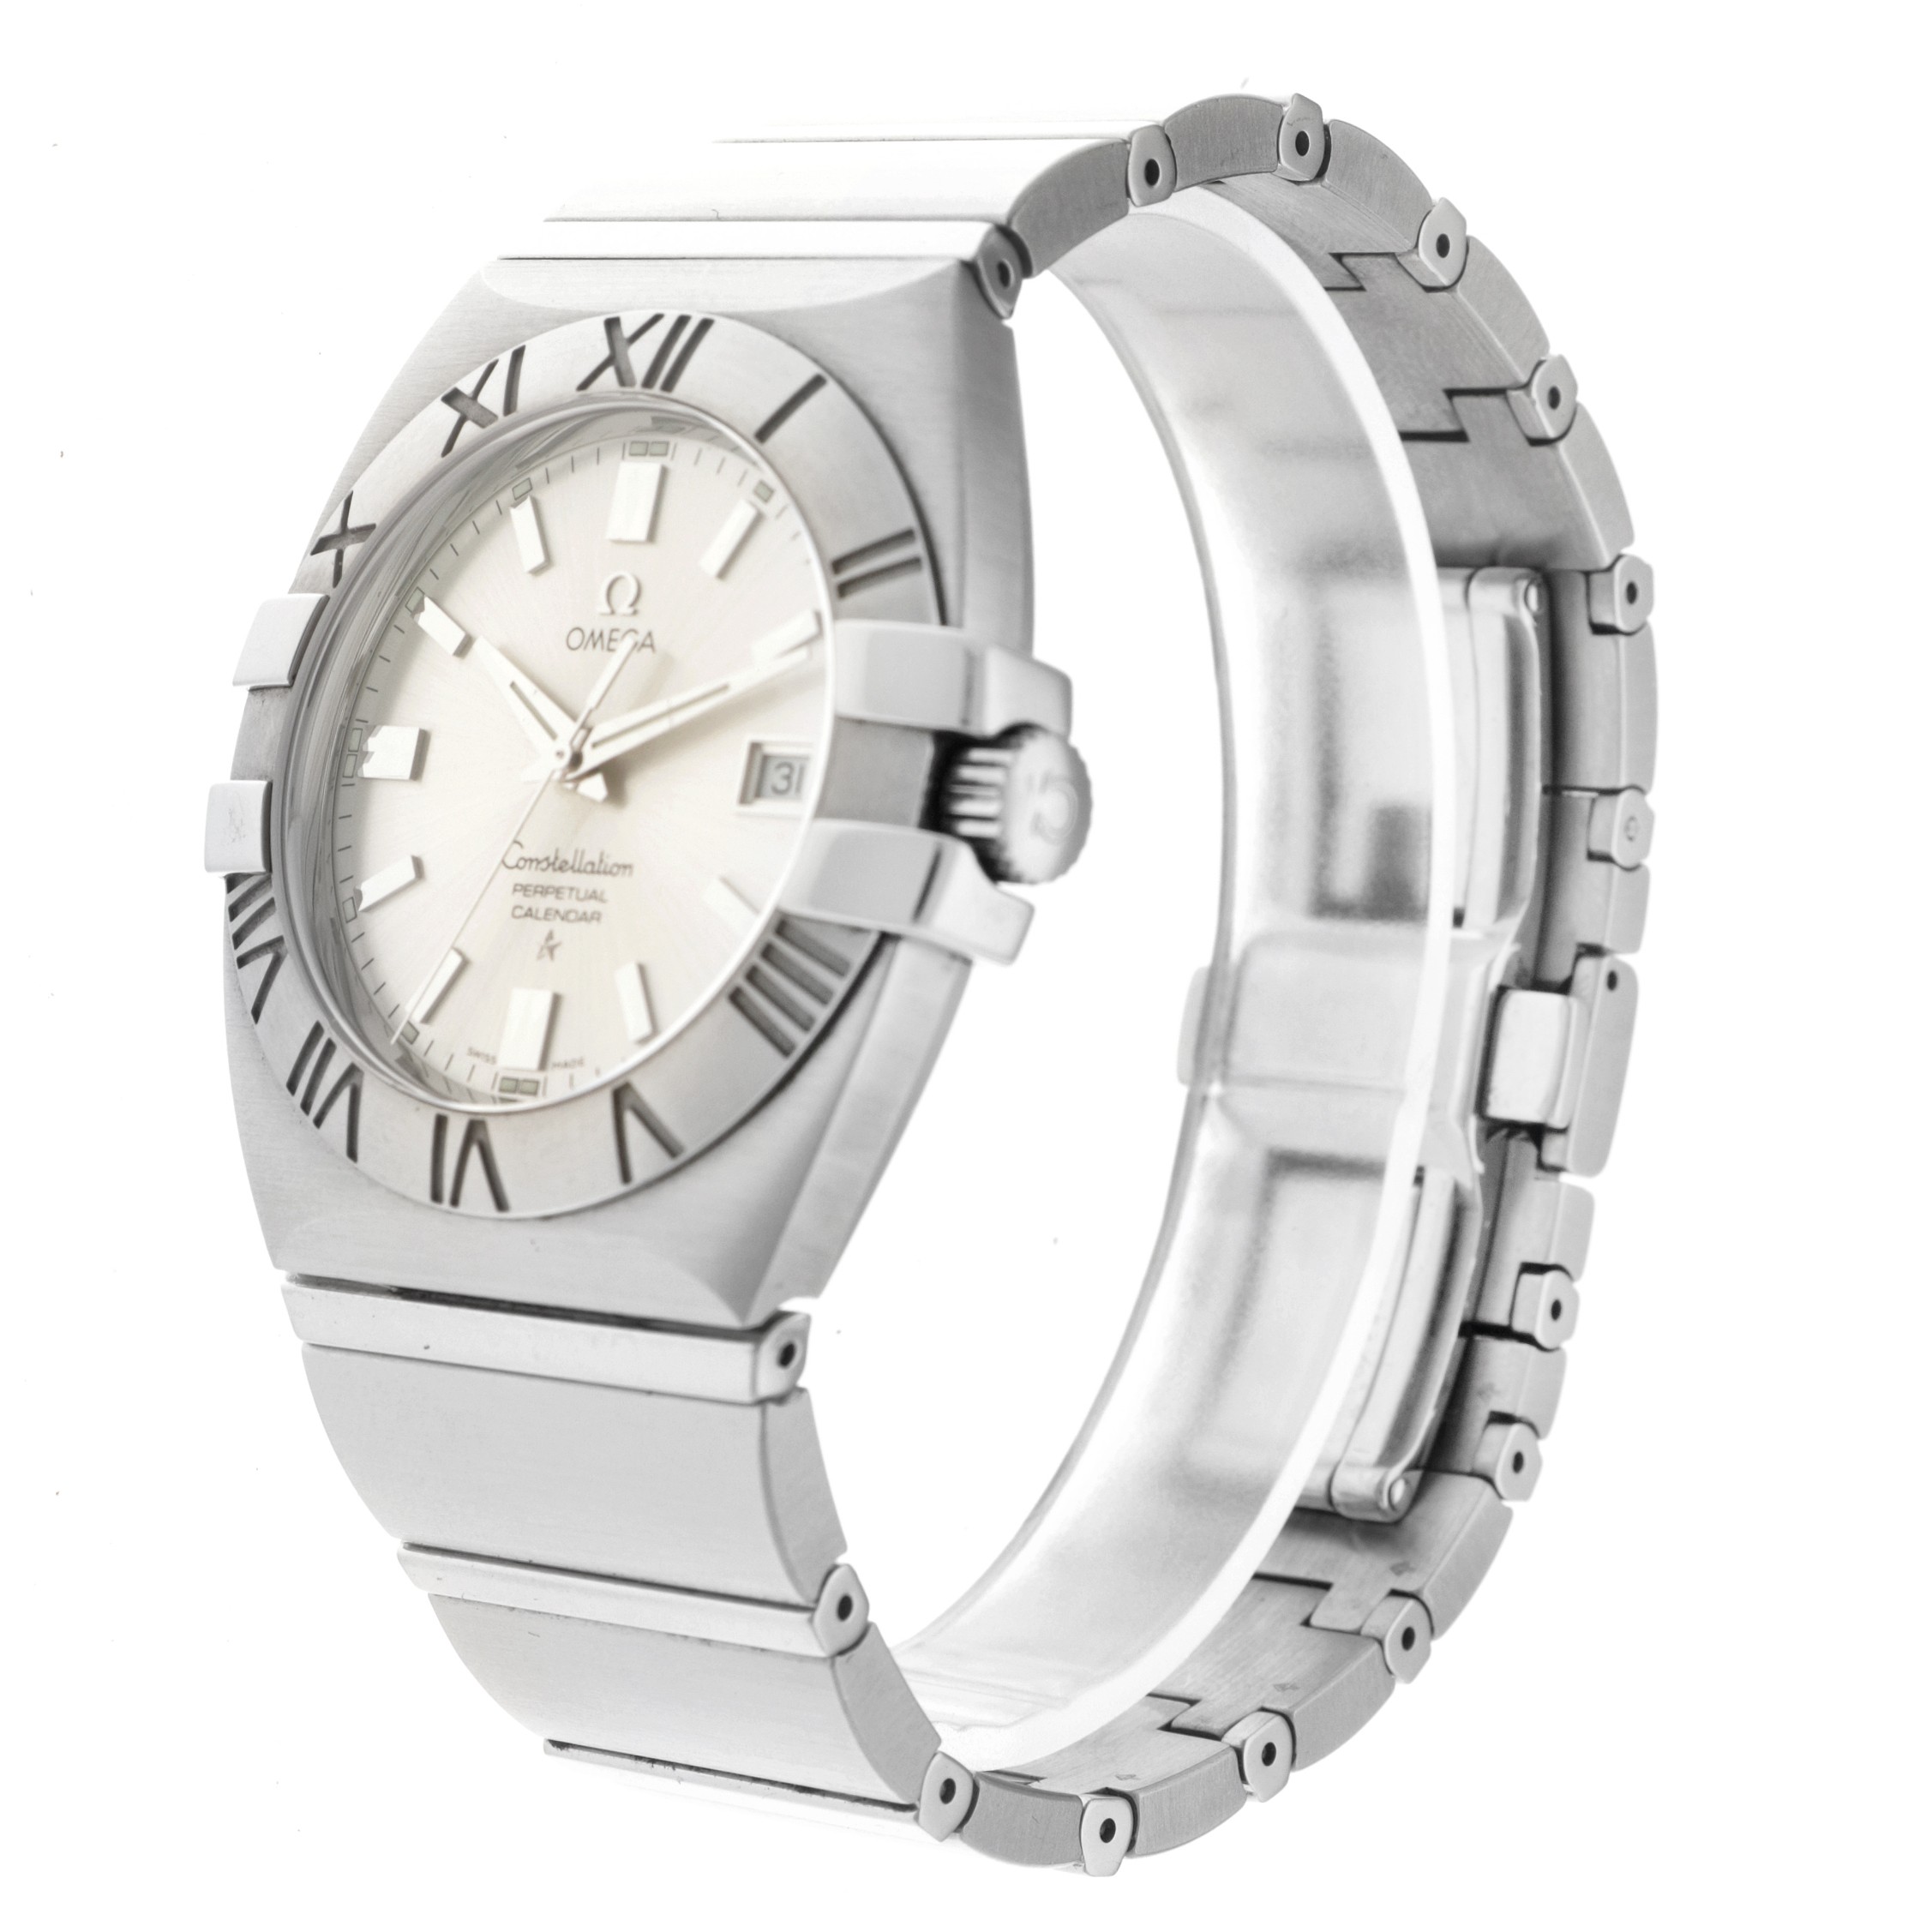 No Reserve - Omega Constellation Perpetual Calender 396.1203 - Men's watch. - Image 2 of 6